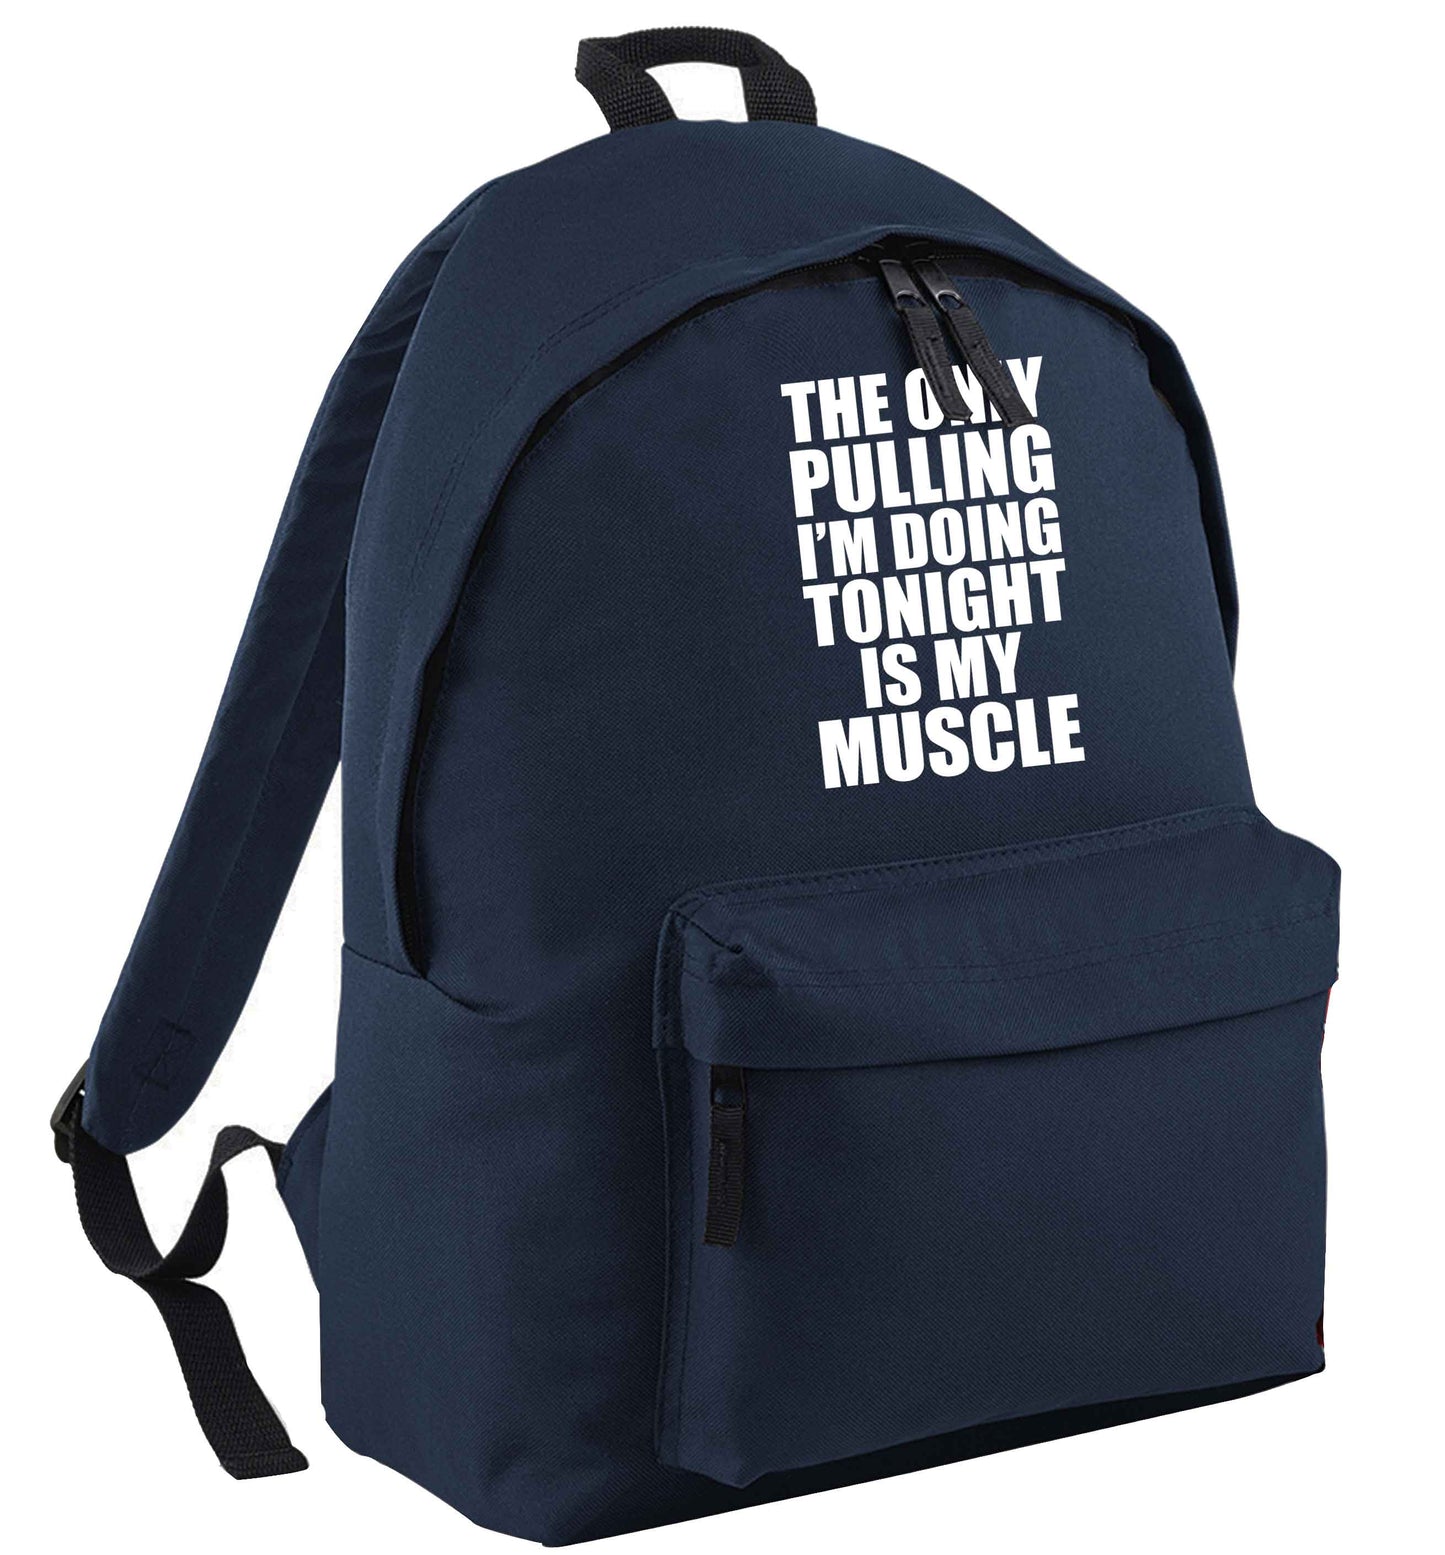 The only pulling I'm doing tonight is my muscle navy adults backpack